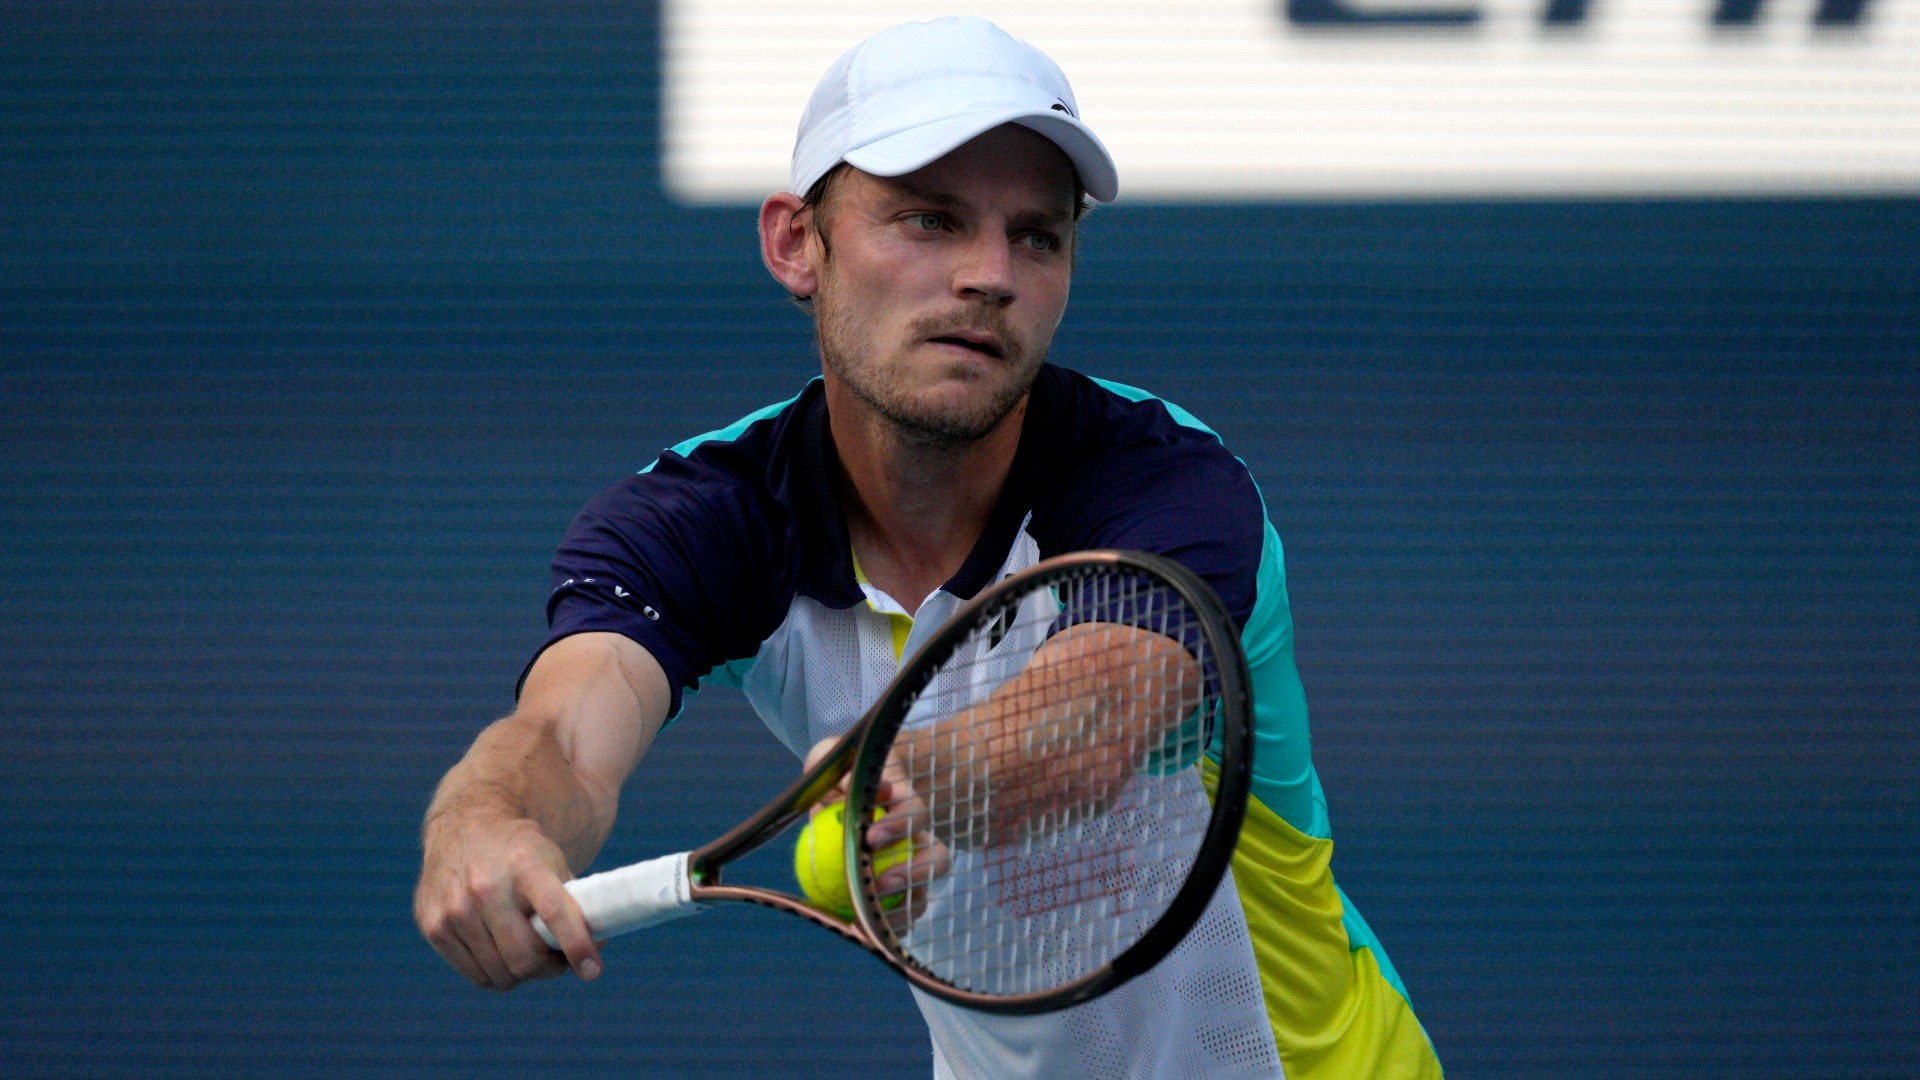 Goffin to face Andujar in Marrakech beIN SPORTS